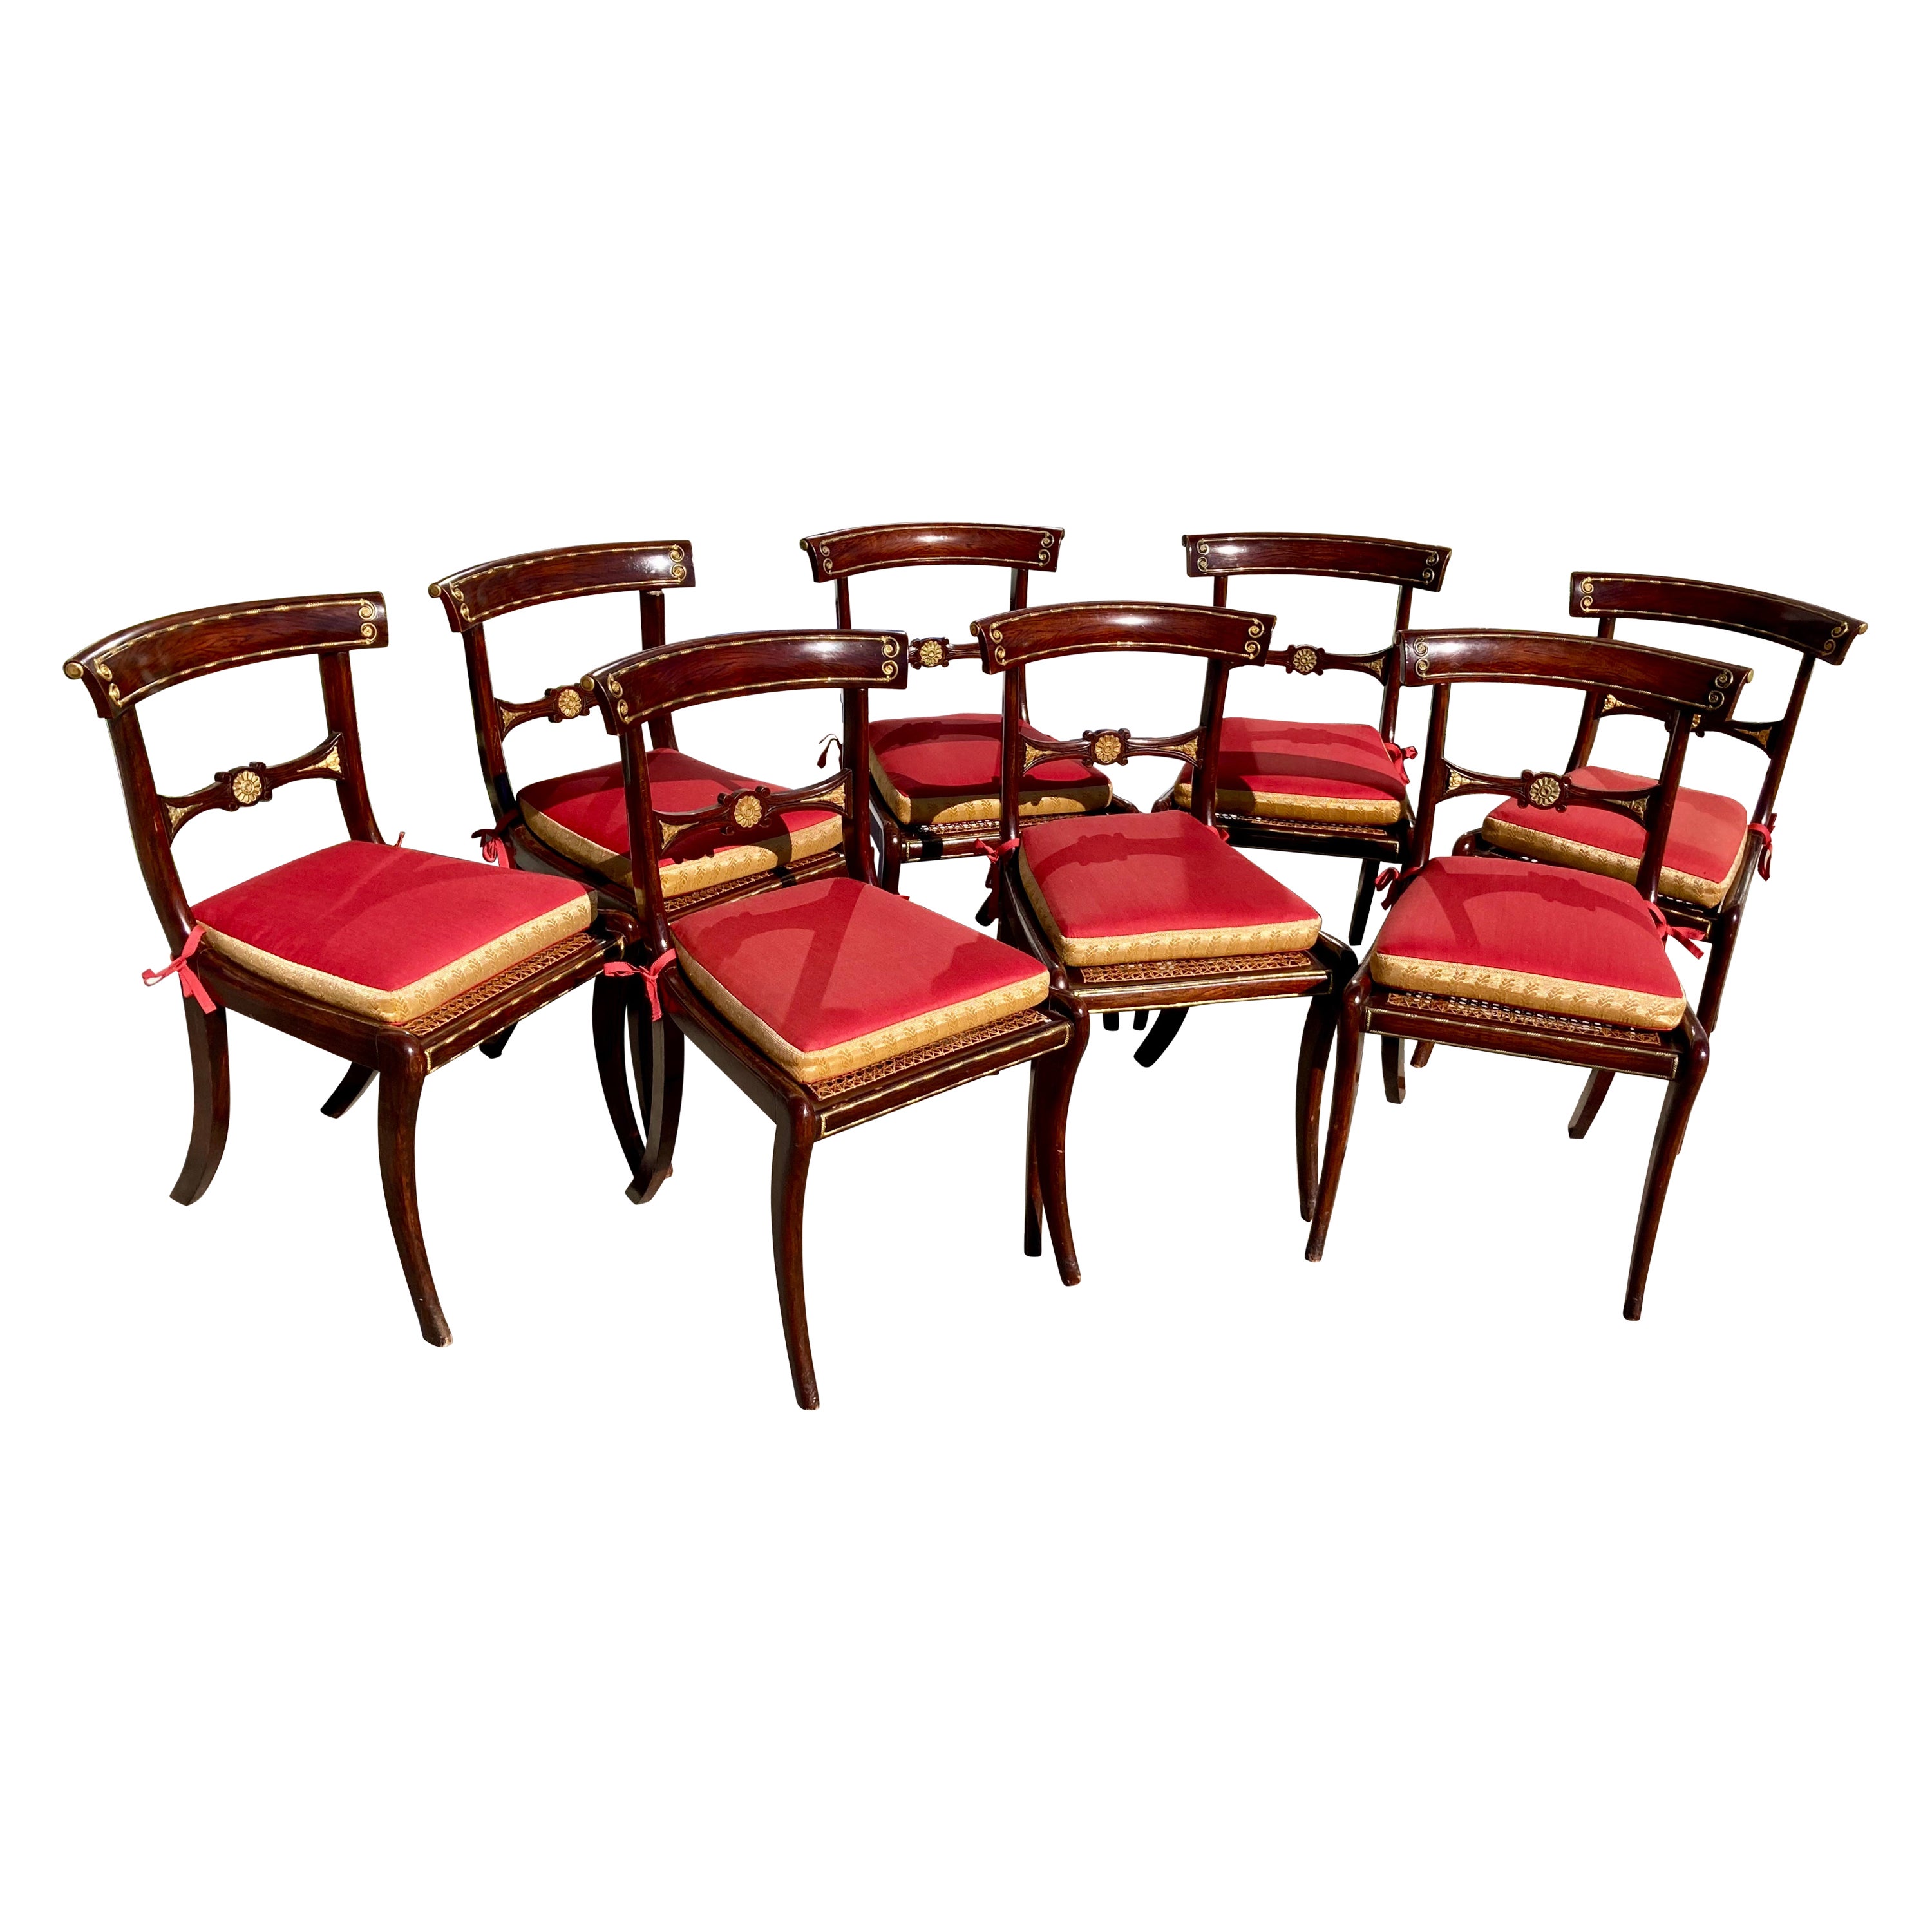 19th C Ormolu Inset Regency Chairs With Red Cushions and Gold Metal, Set of 8 For Sale